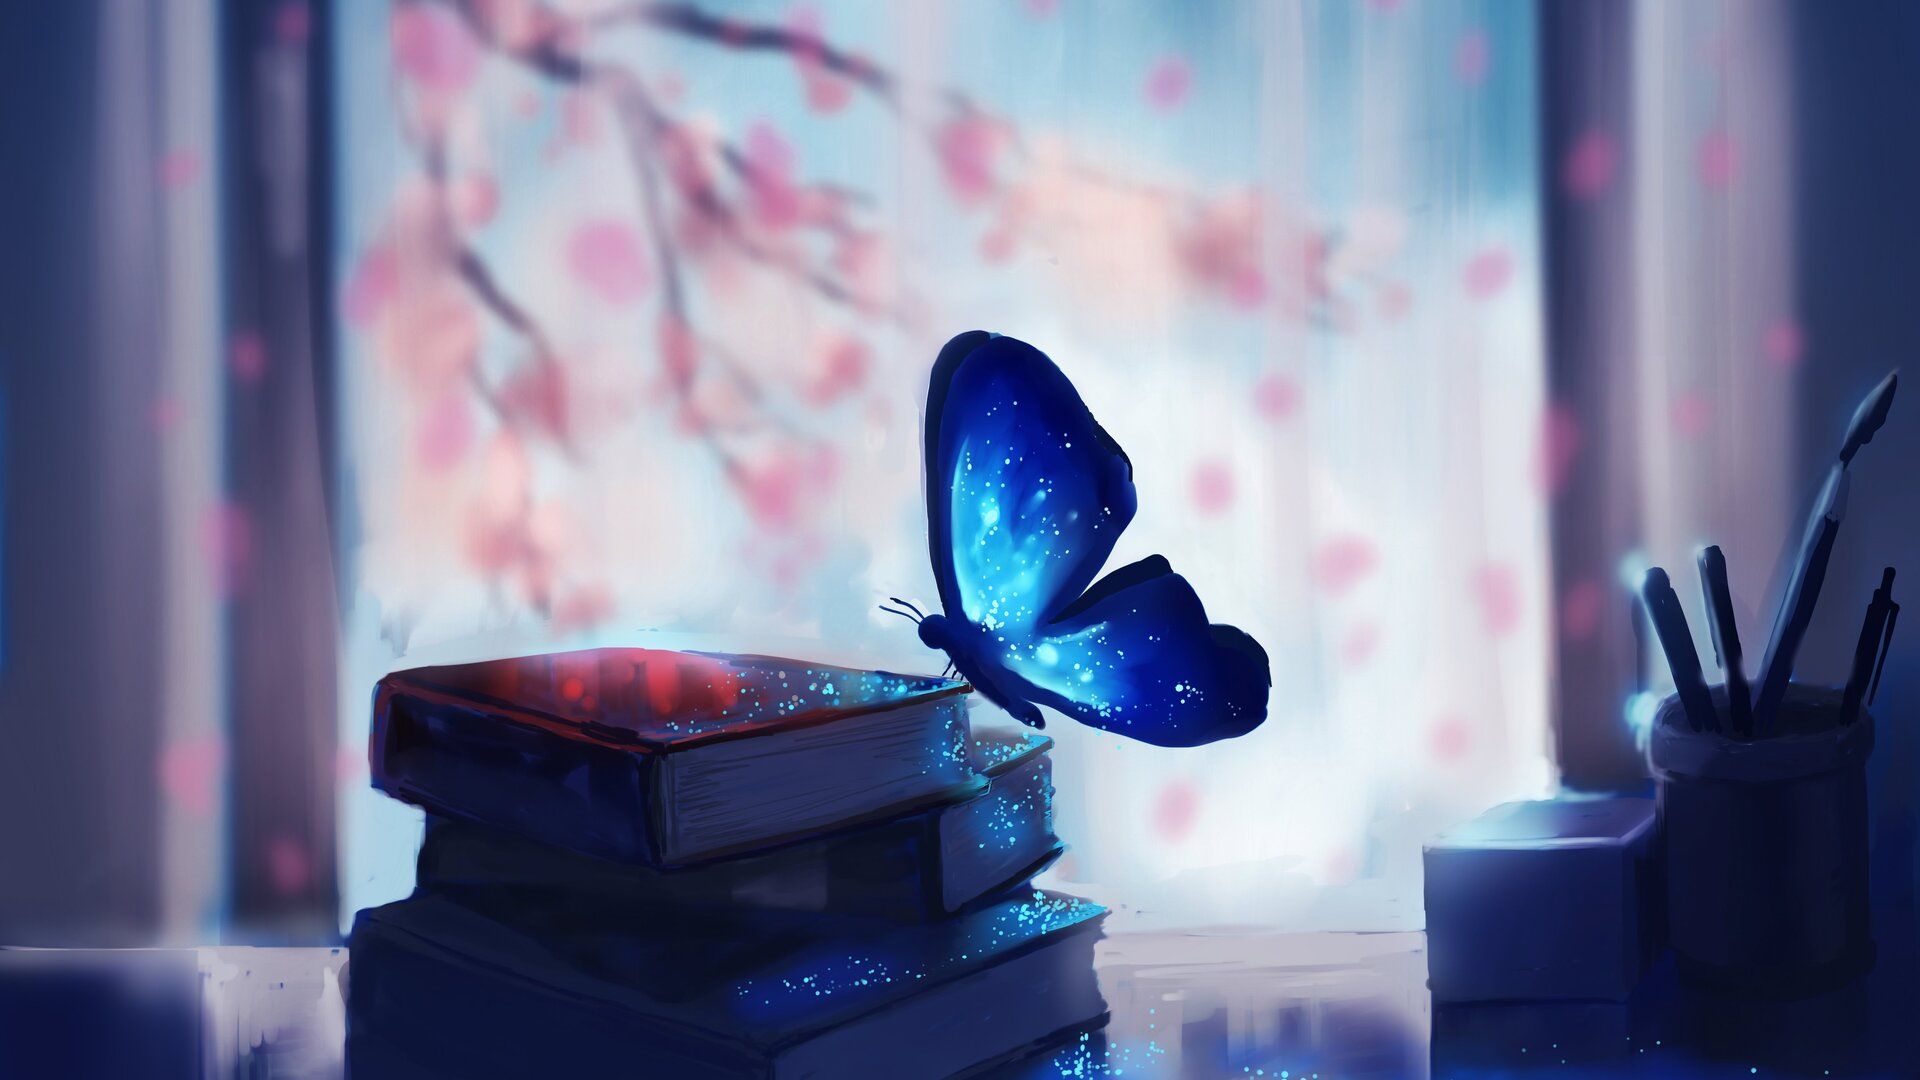 Butterfly Colorful Glowing Fantasy Artwork Books 5k Laptop Full HD 1080P HD 4k Wallpaper, Image, Background, Photo and Picture